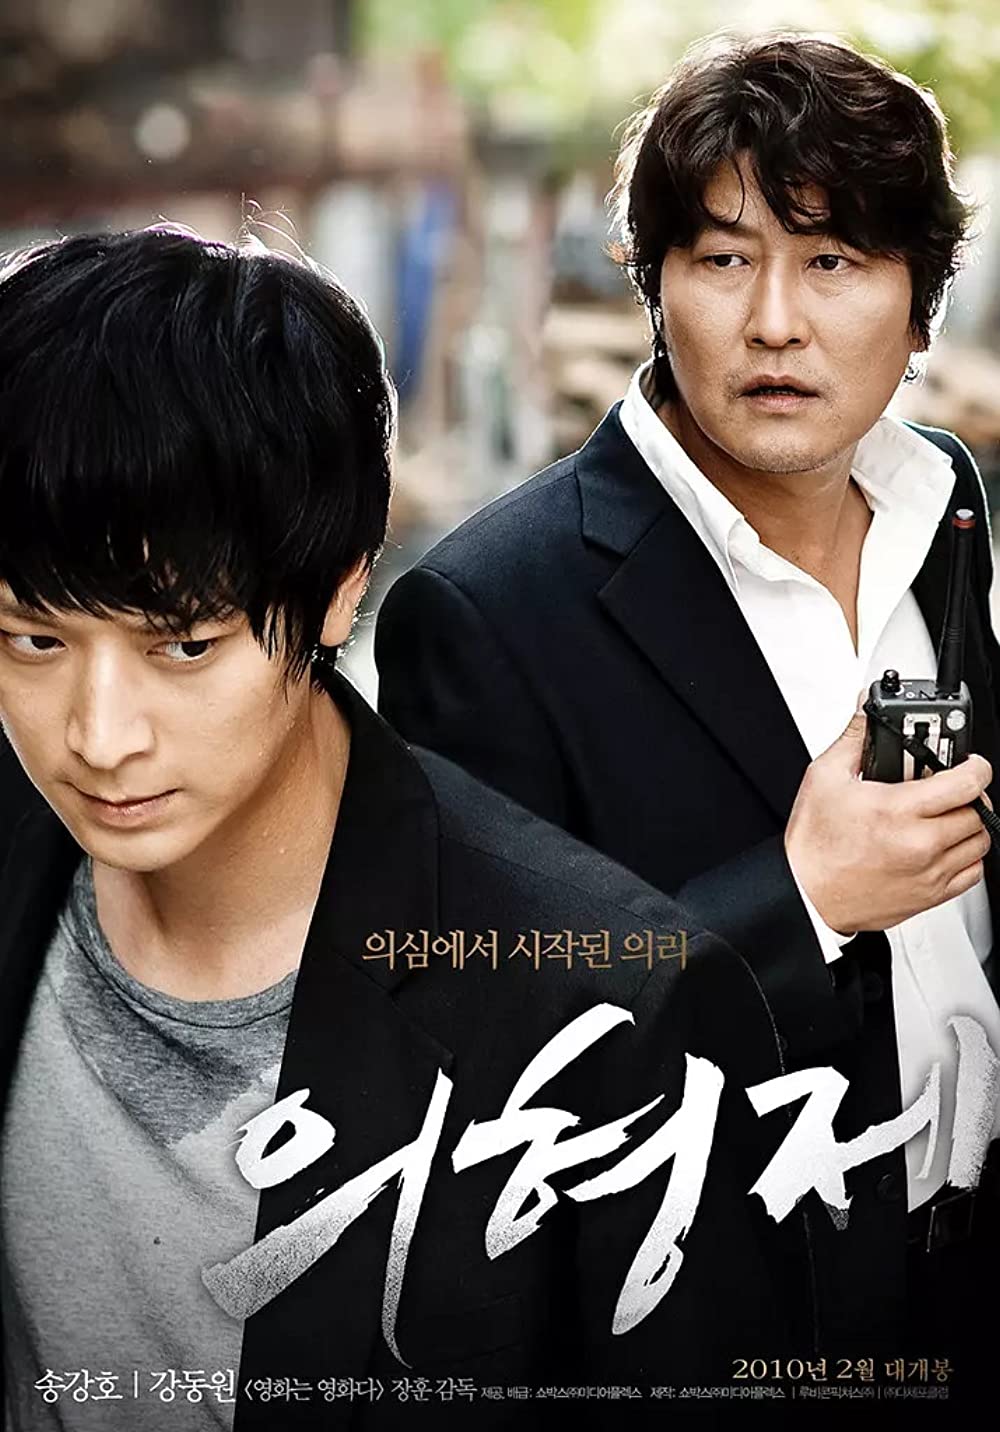 Download Ui-hyeong-je Movie | Ui-hyeong-je Hd, Dvd, Divx